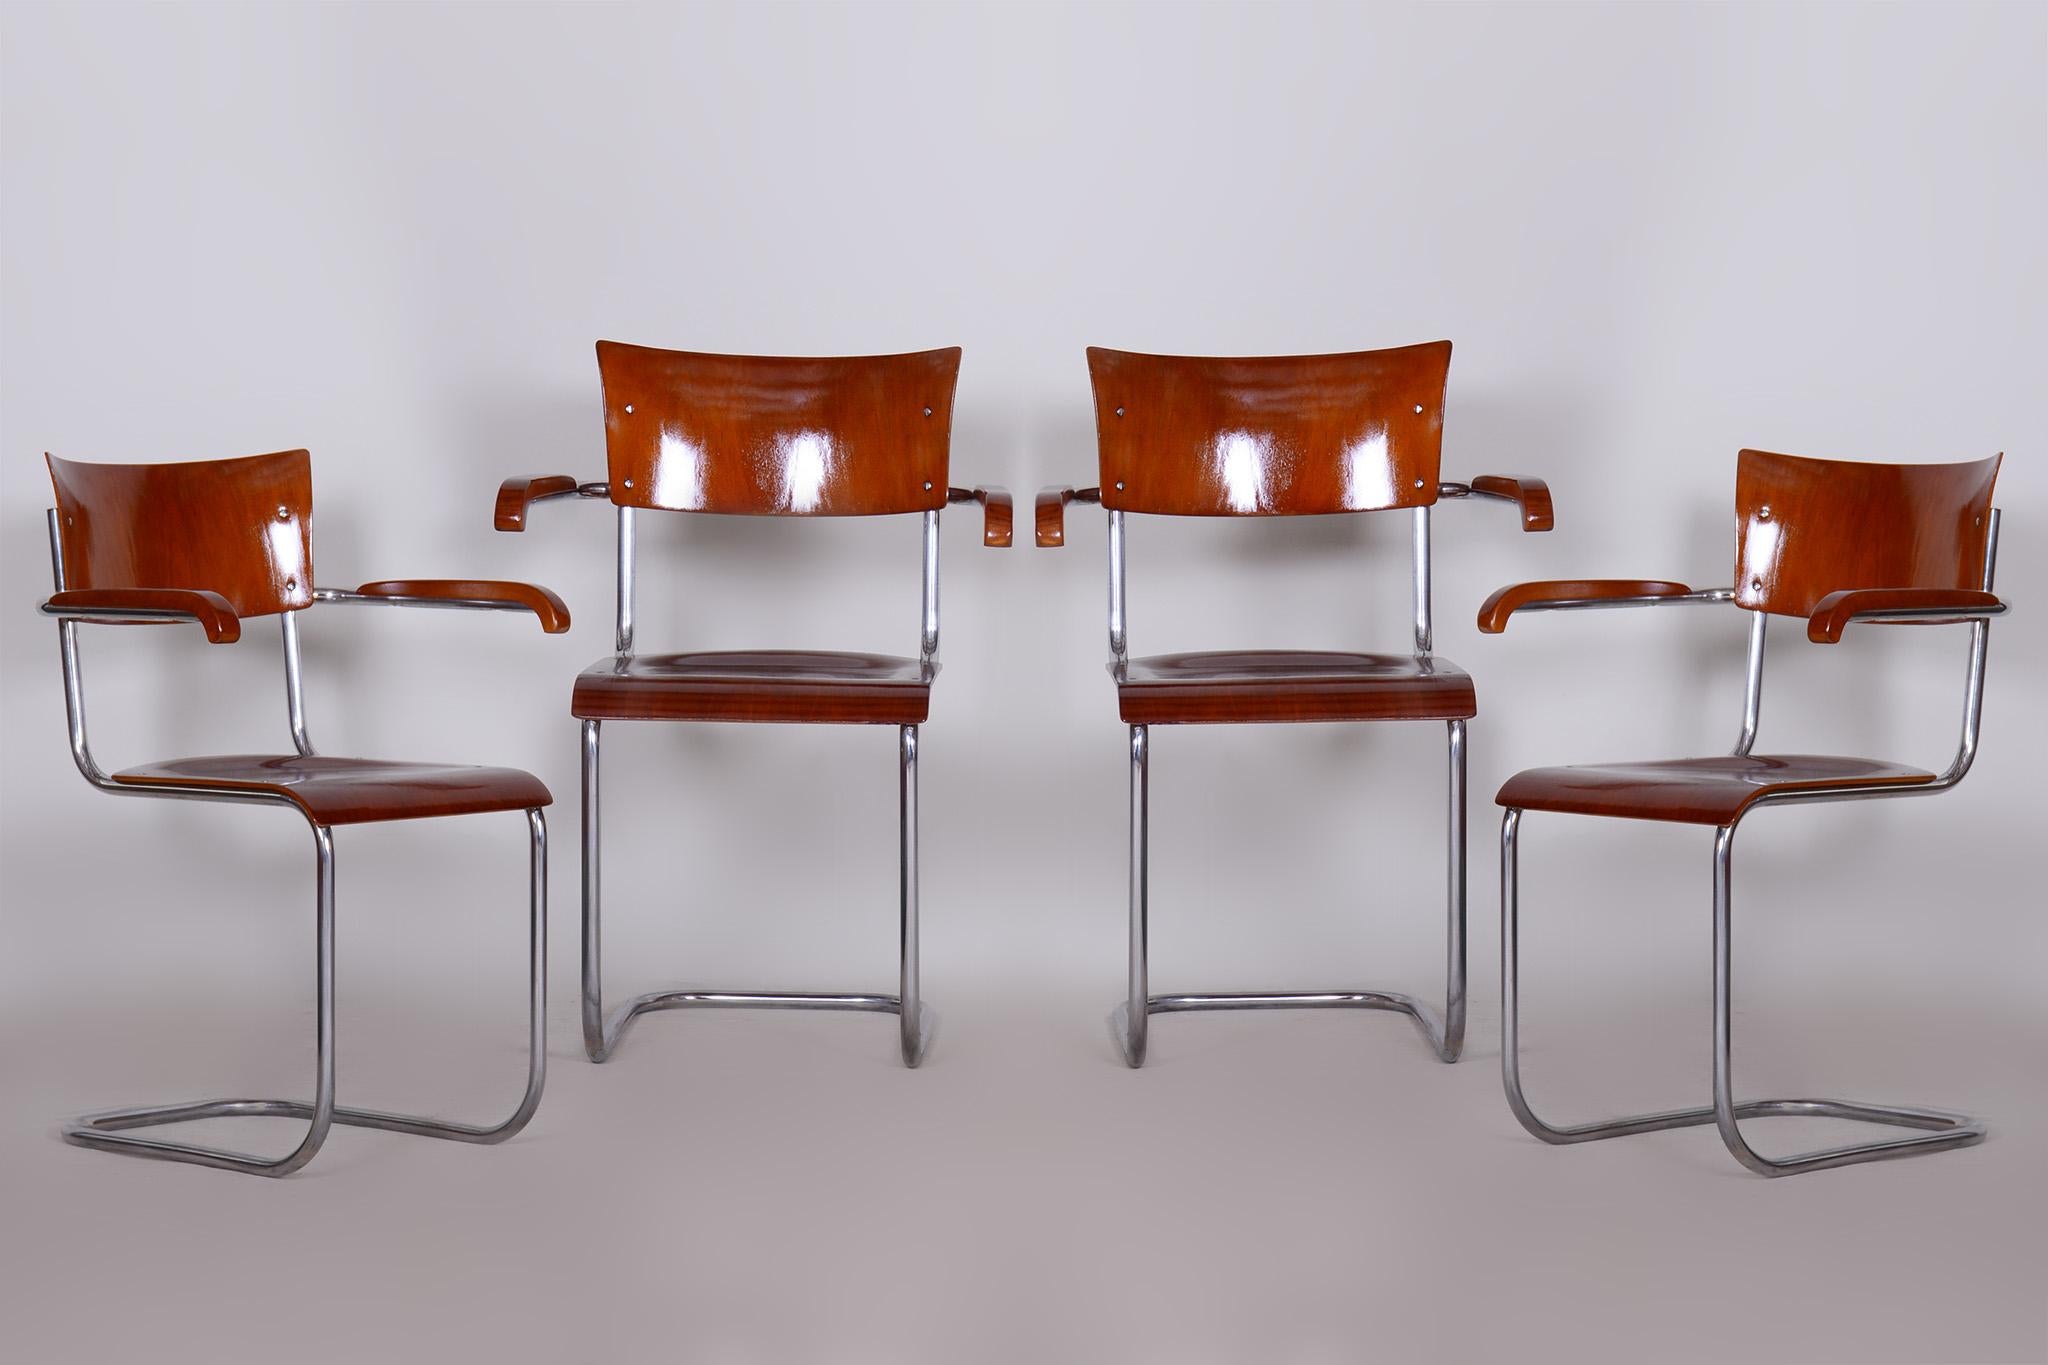 Set of 4 Restored Bauhaus Beech Plywood Armchairs by Mart Stam, 1930s, Germany For Sale 3